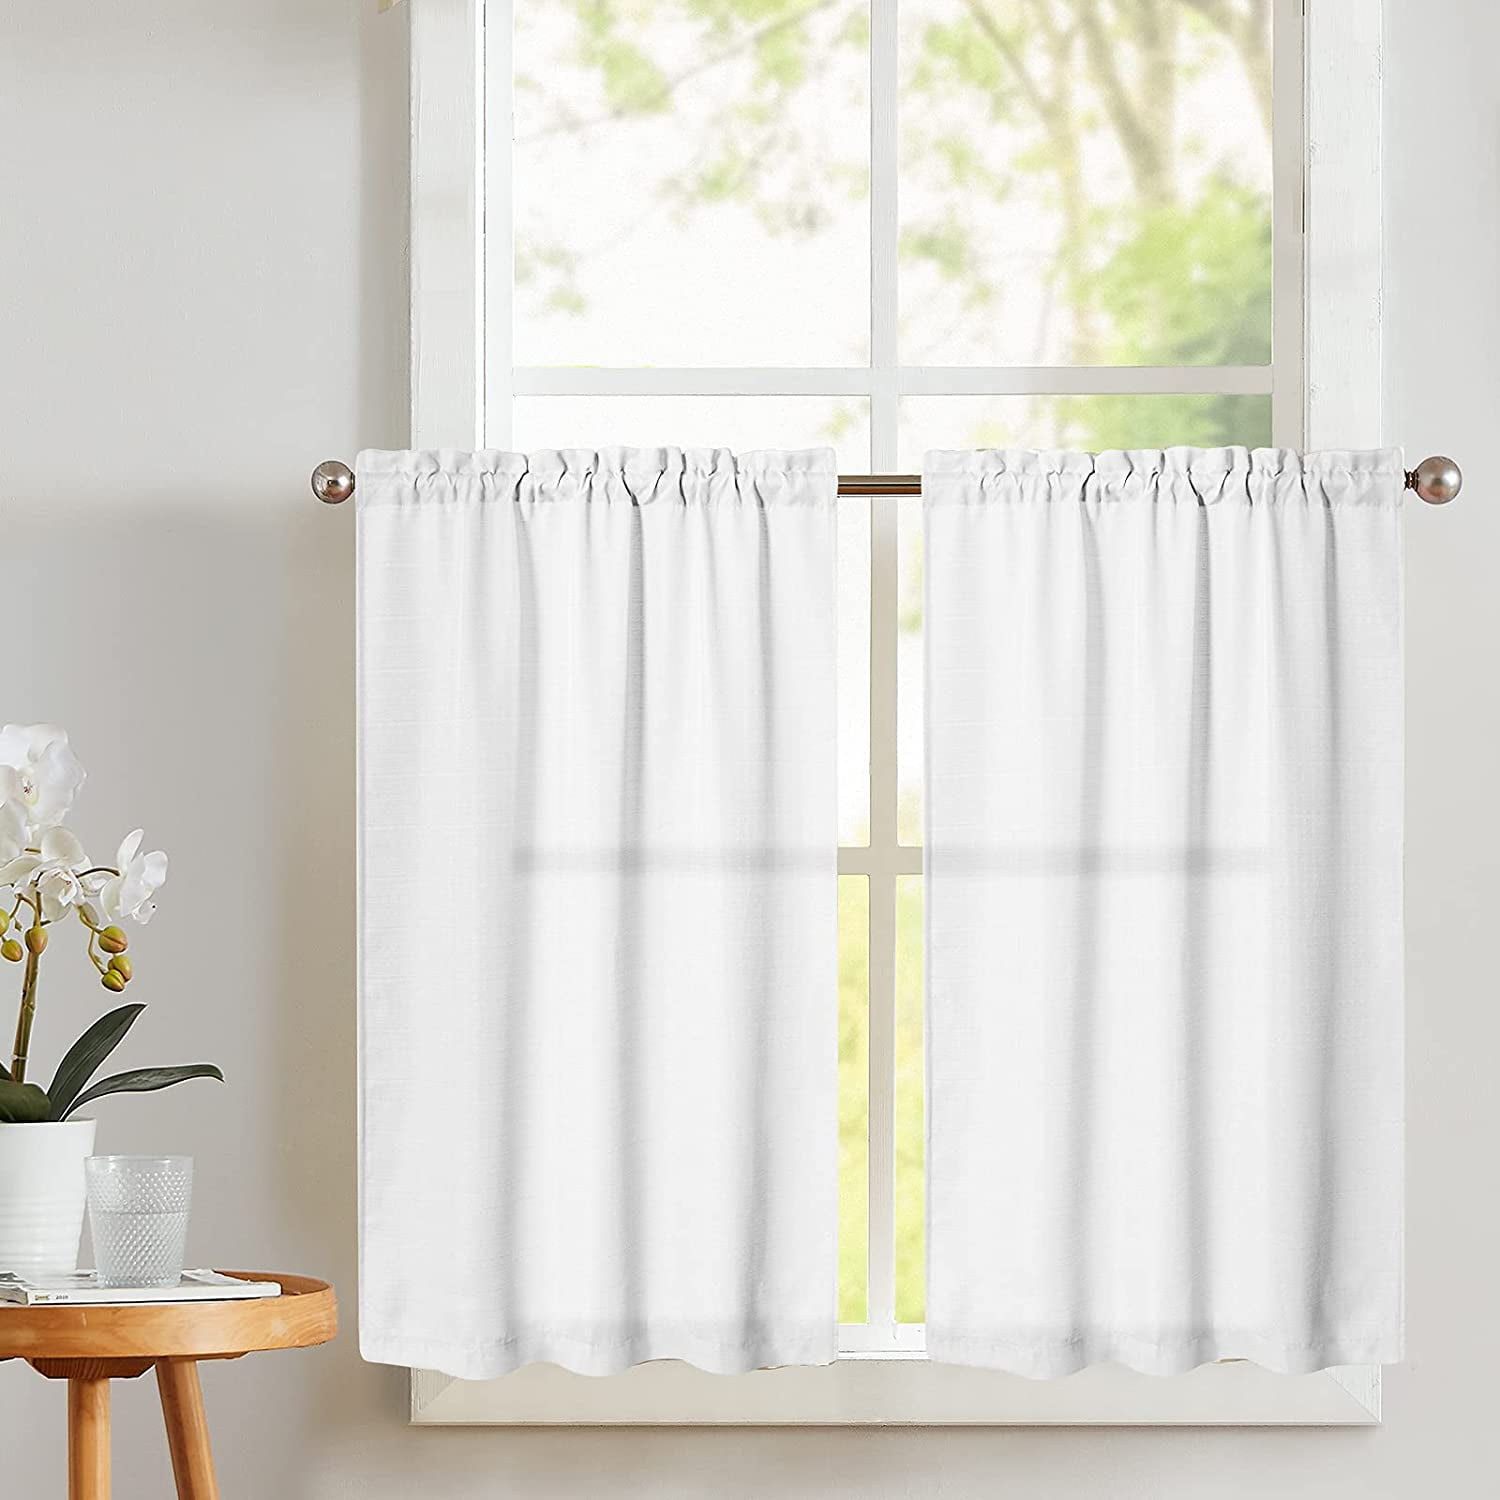 Sheer Curtains 45 inch Length for Kitchen Window Cafe Curtains Half Window Treat 